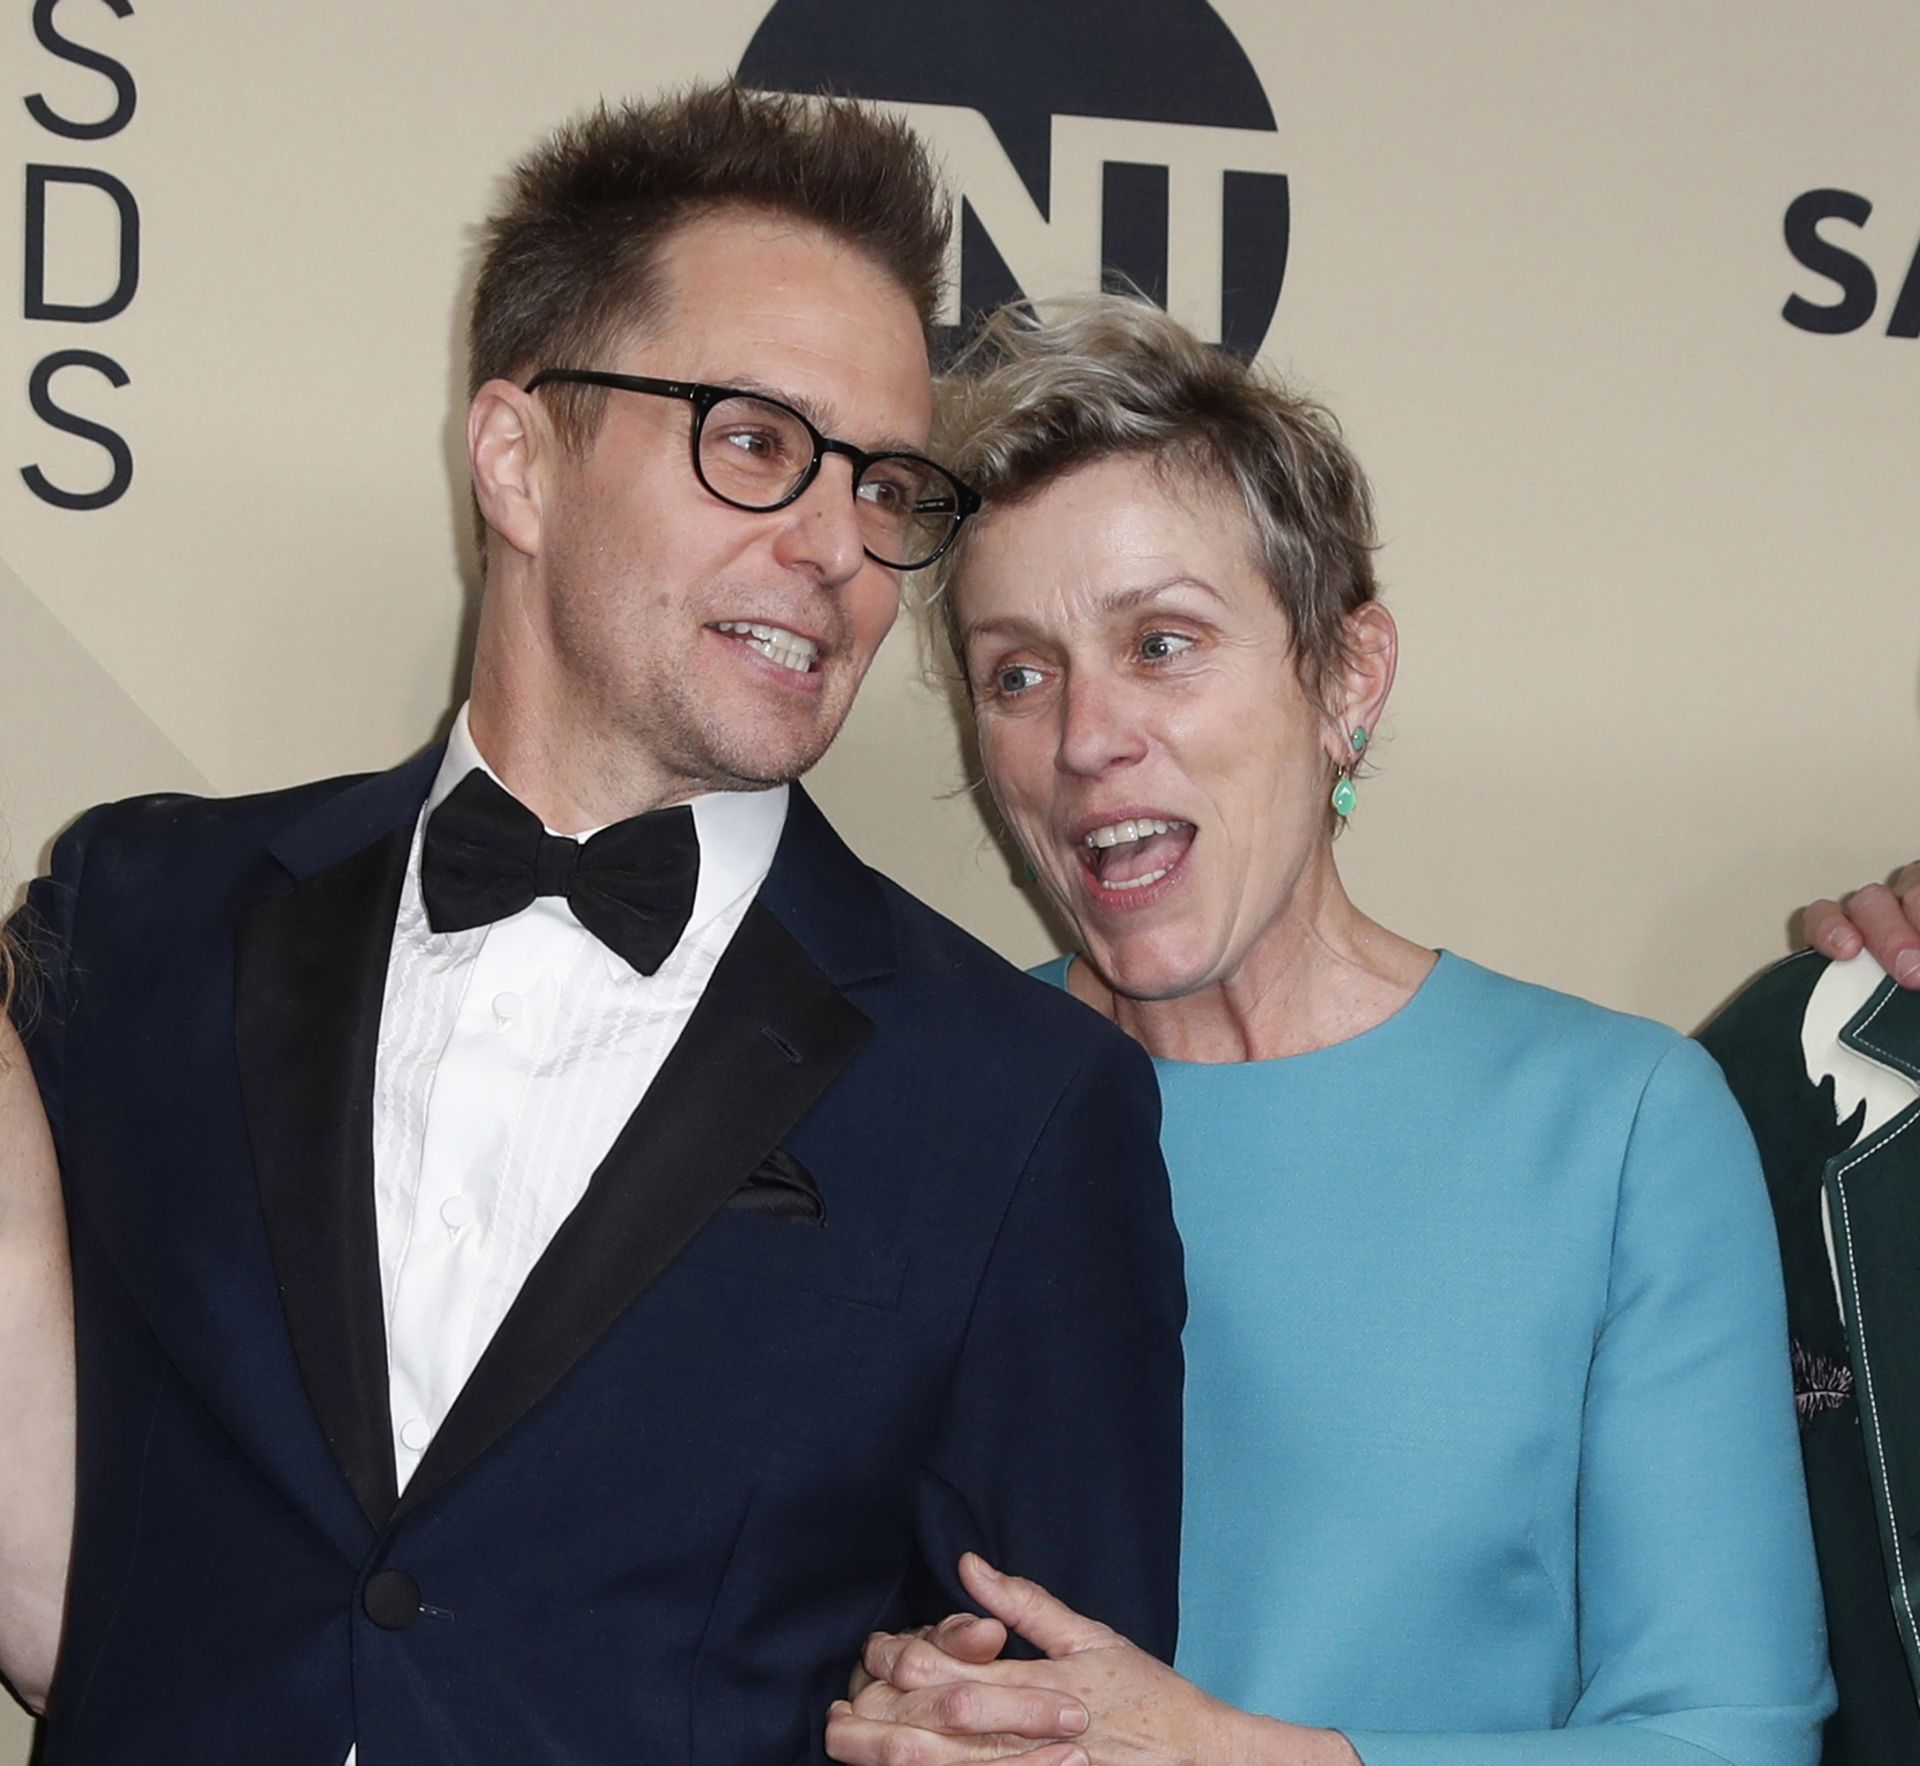 epa06463431 Sam Rockwell (L) and Frances McDormand (R), winners of Outstanding Performance by a Cast in a Motion Picture for 'Three Billboards Outside Ebbing, Missouri,' pose in the Press Room during the 24th annual Screen Actors Guild Awards ceremony at the Shrine Exposition Center in Los Angeles, California, USA, 21 January 2018. The SAG Awards honors the best achievements in film and television performances.  EPA/MIKE NELSON